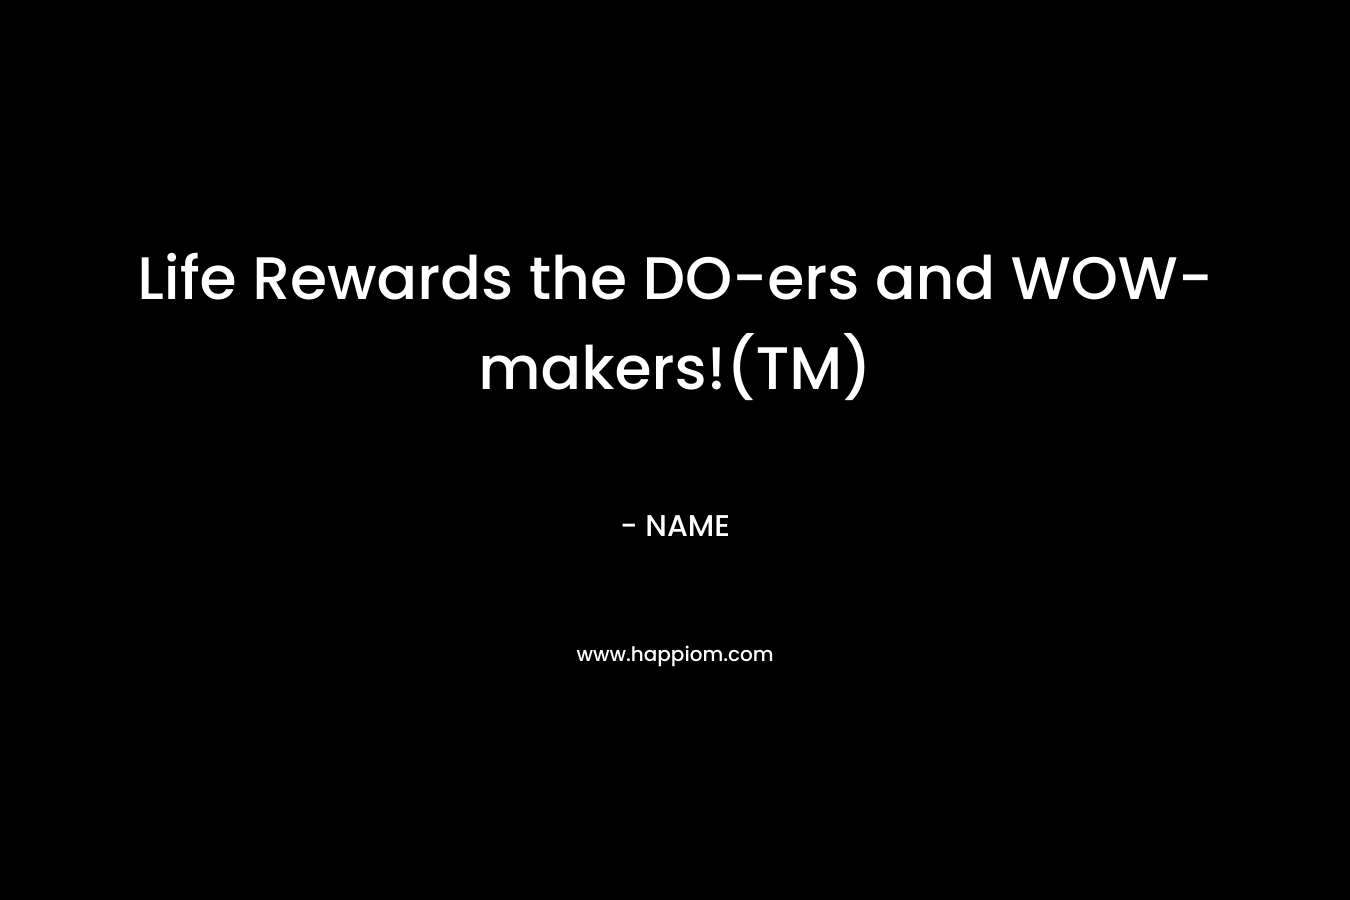 Life Rewards the DO-ers and WOW-makers!(TM) – NAME